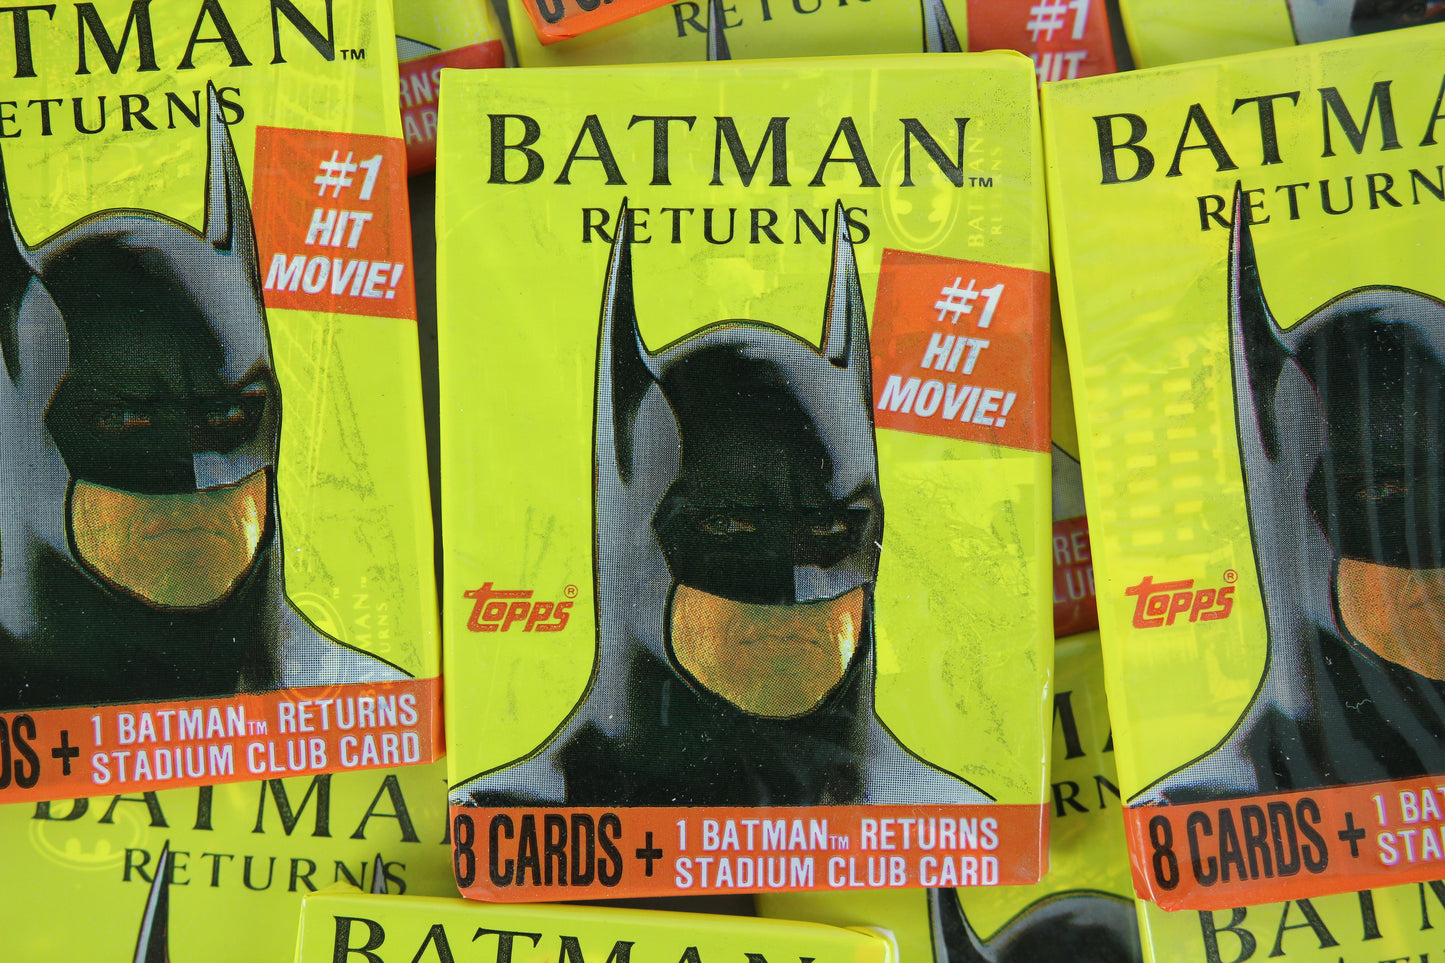 Topps Batman Returns Photo Cards Collectible Trading Cards, One Pack, 1991